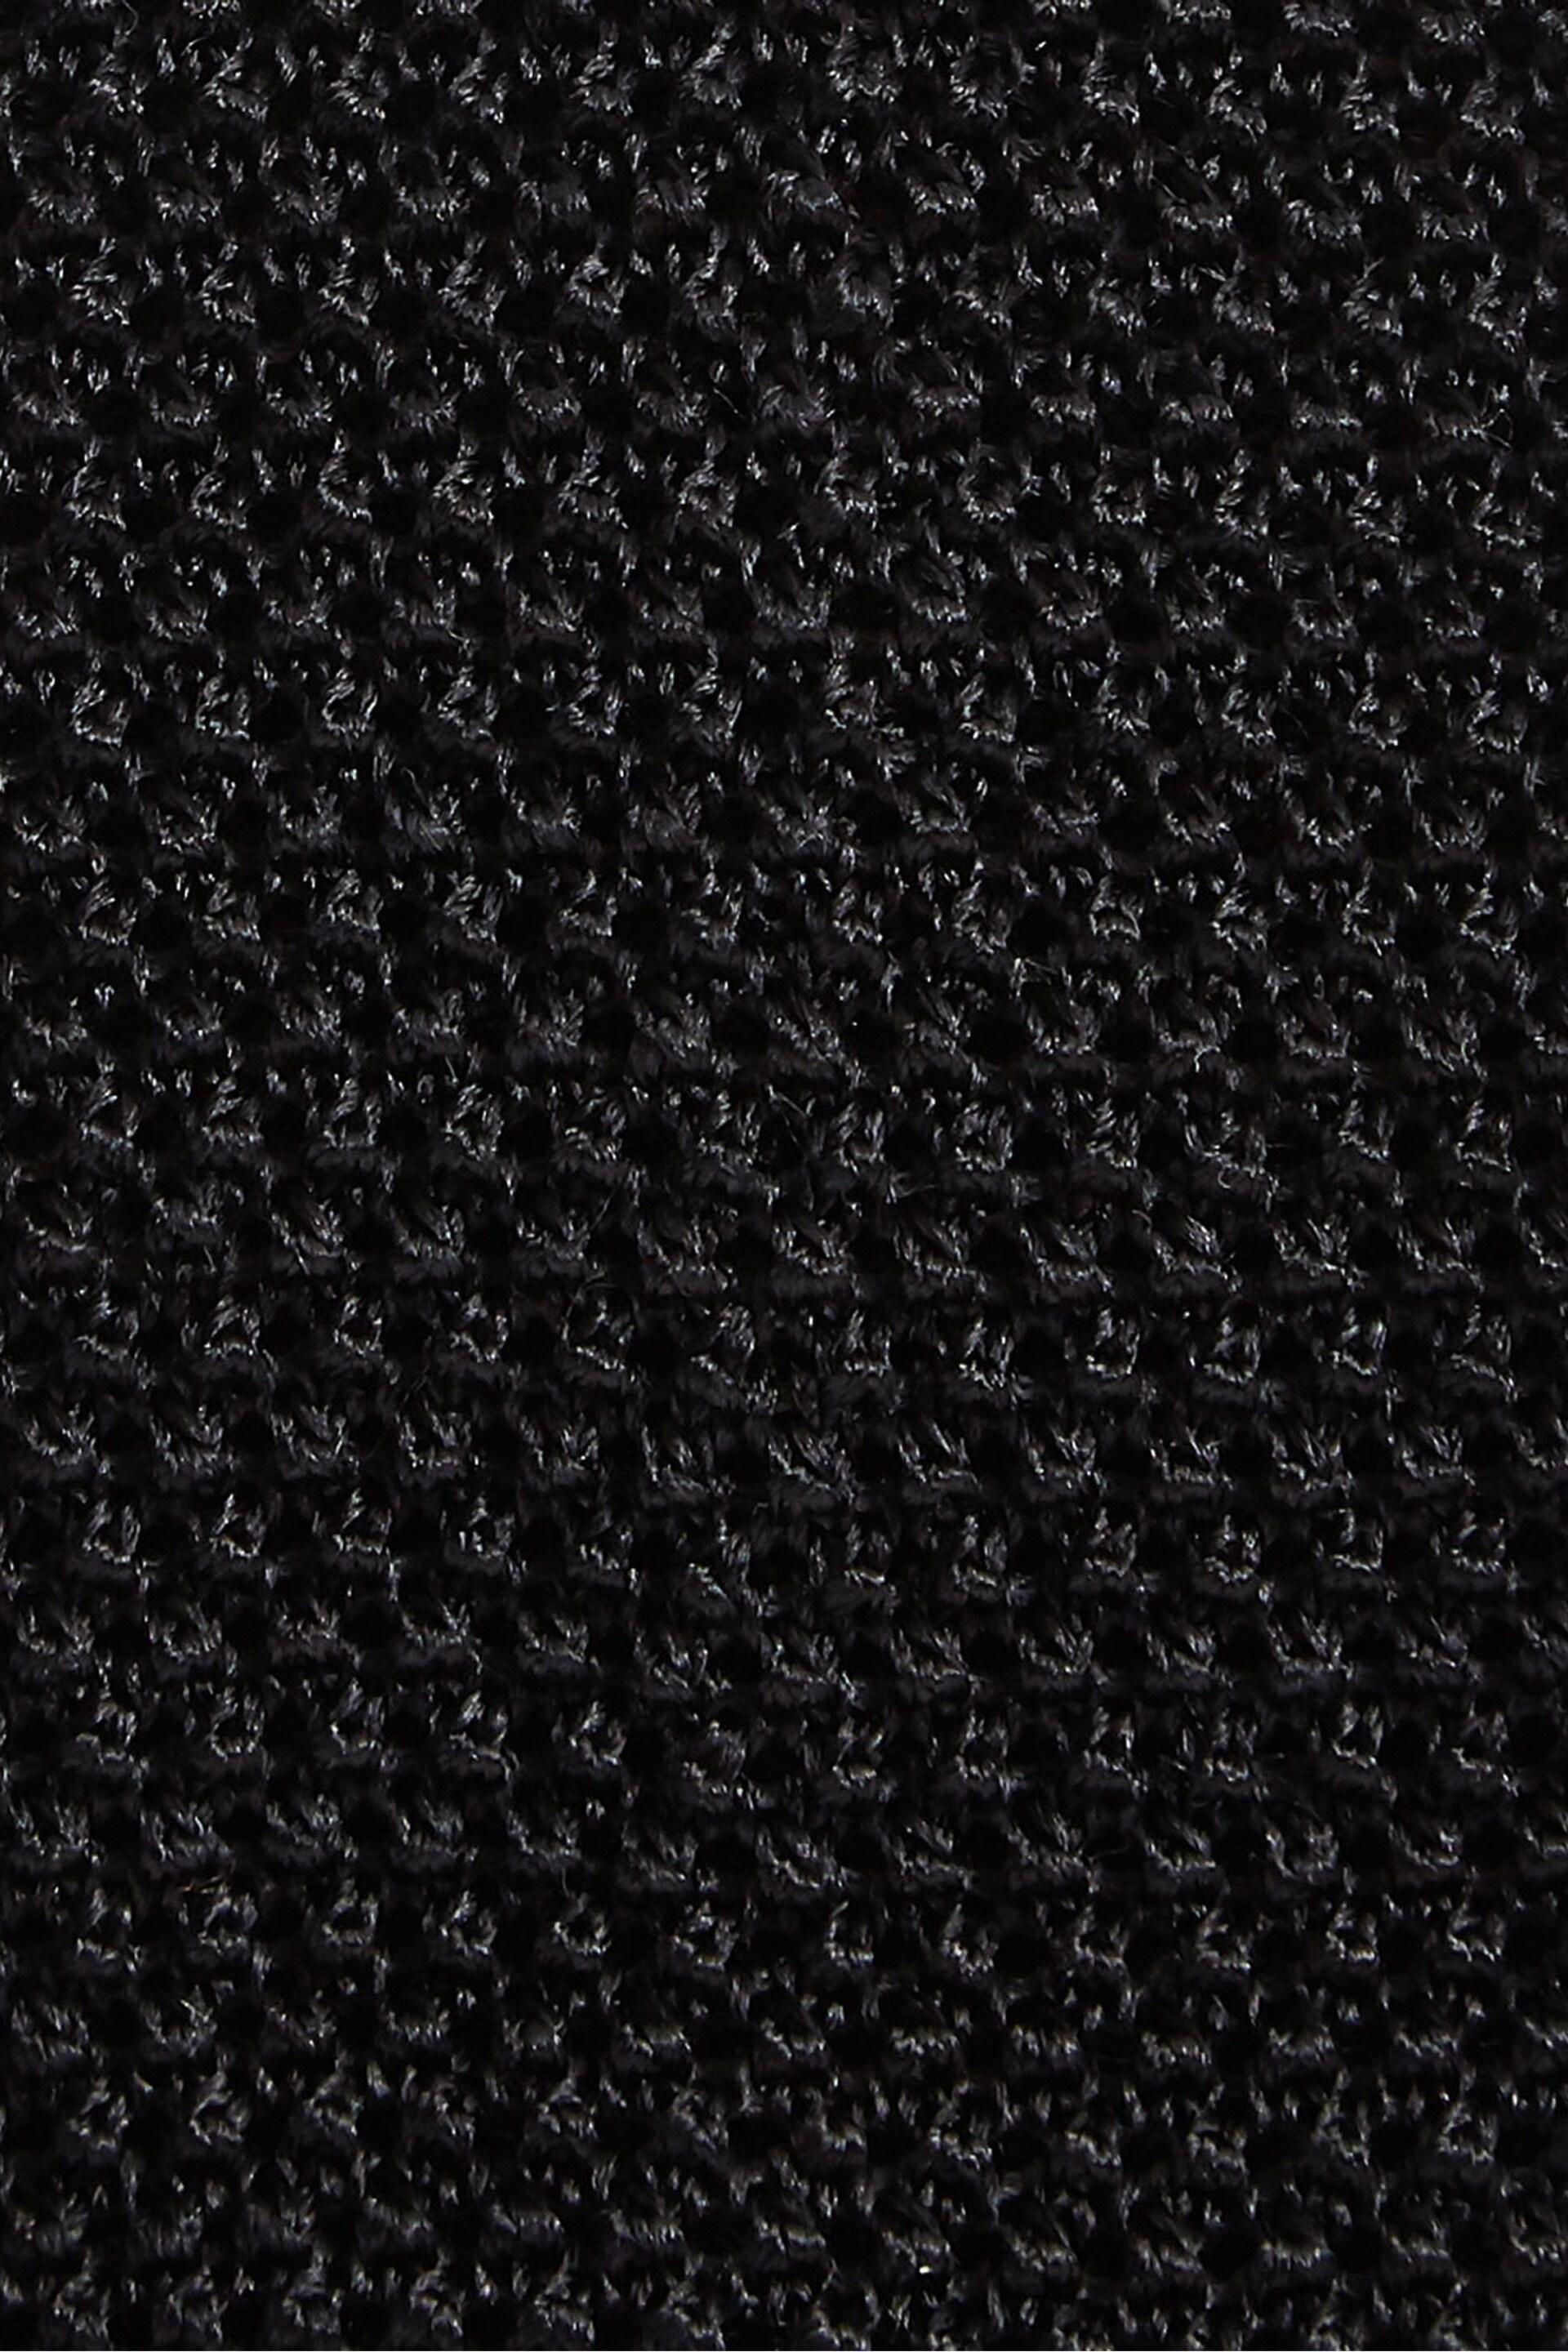 Reiss Black Bank Knitted Silk Tie - Image 4 of 4